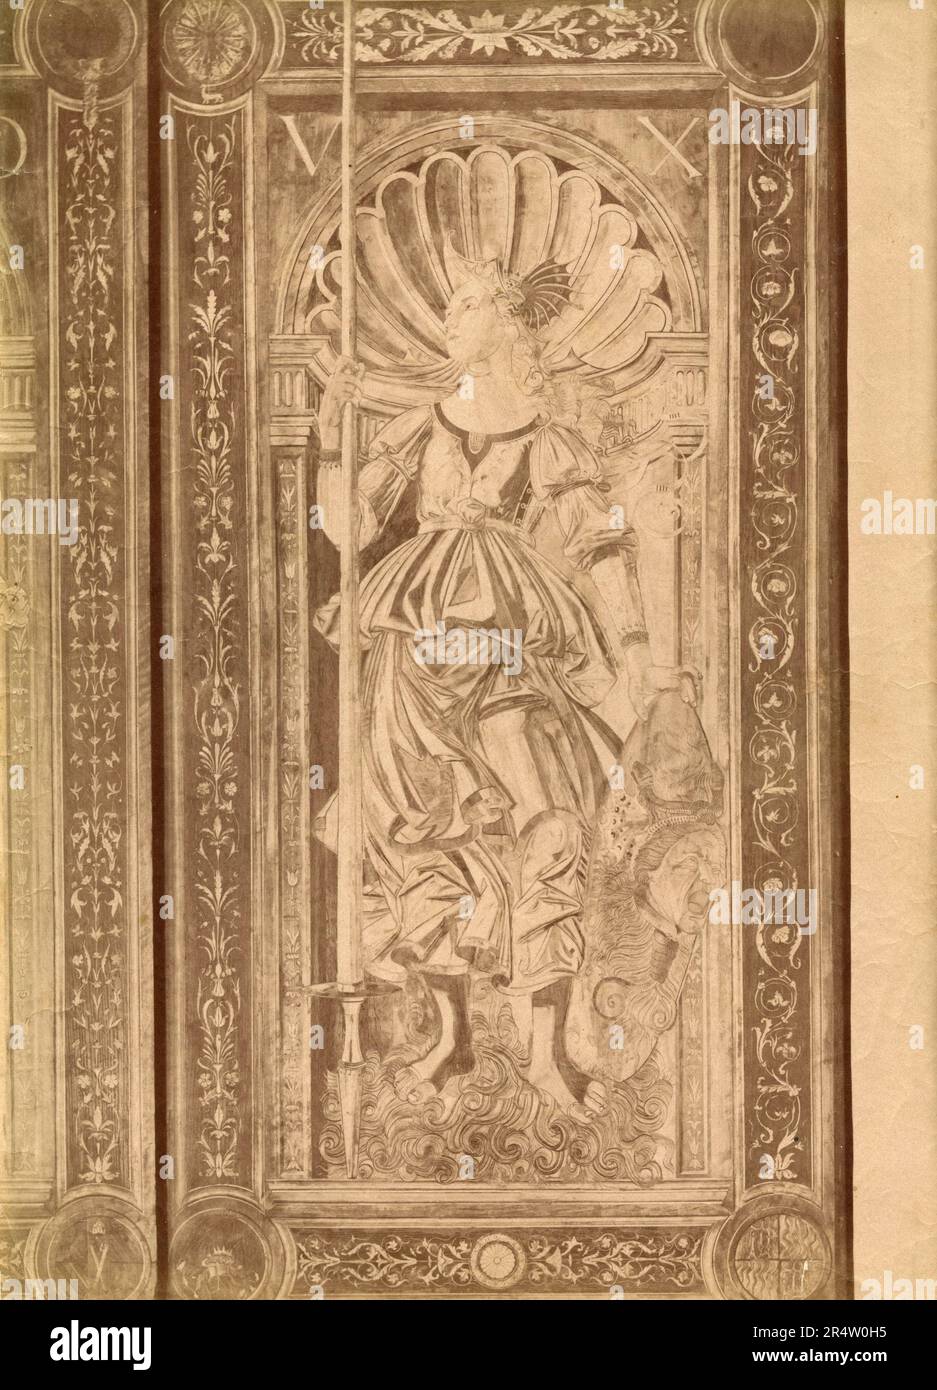 Carving of a door with allegorical figure, artwork by Italian artist Botticelli, Palazzo Ducale, Urbino, Italy 1900s Stock Photo